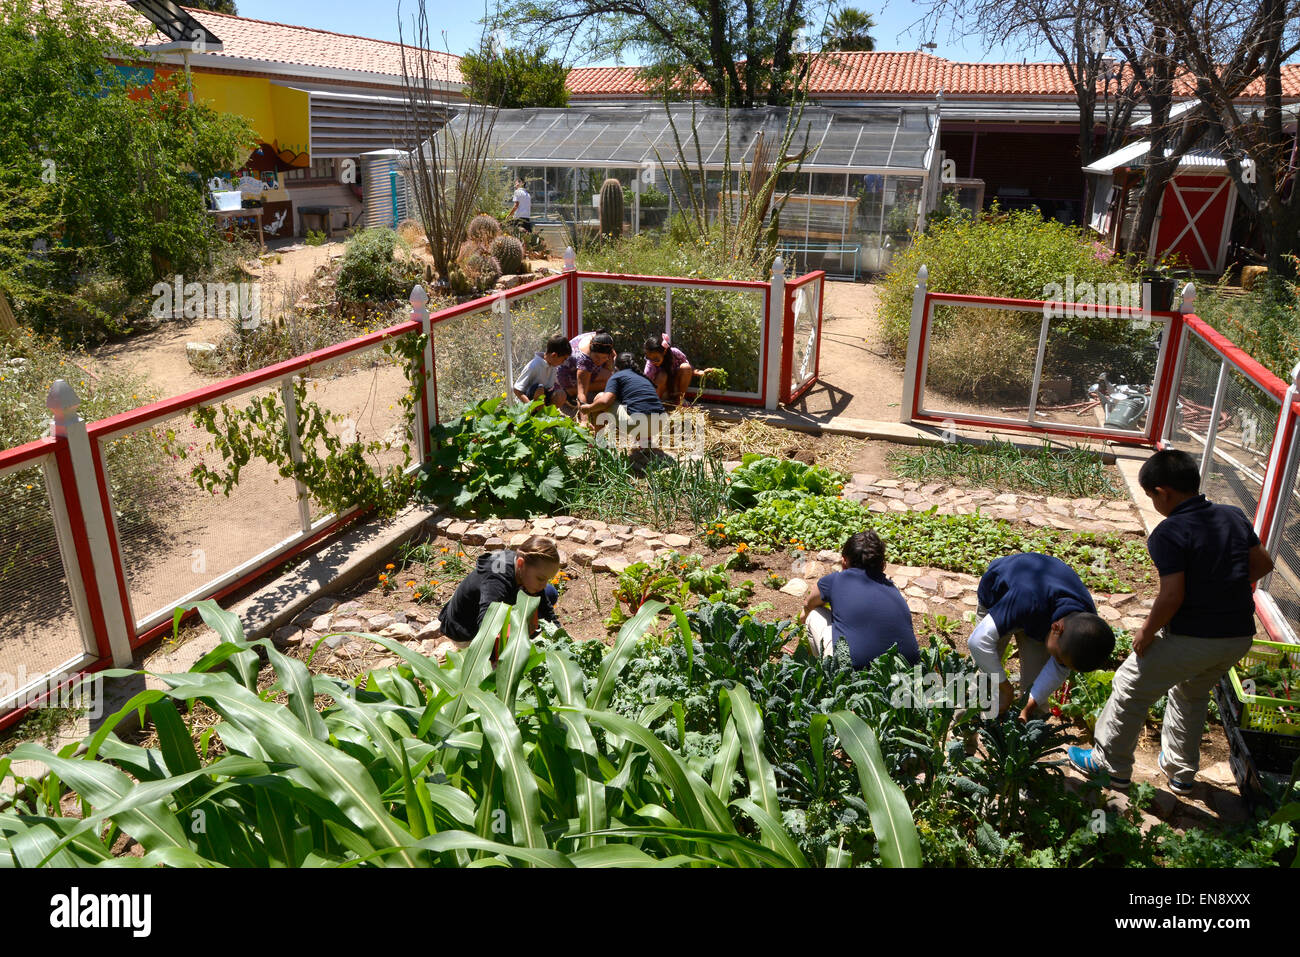 Tucson, Arizona, USA. 29 April, 2015: Students work in the school garden at Manzo Elementary School, Tucson, Arizona, USA.  The school was the first in TUSD to be certified for garden to cafeteria food consumption and first in the state of Arizona for rainwater harvesting and composting.  Garden projects in the district work with internationally known Biosphere2 and the University of Arizona. The garden was built in conjunction with the National Park Foundation's First Bloom program.  Named Best Green School 2012 by the U.S. Credit:  Norma Jean Gargasz/Alamy Live News Stock Photo